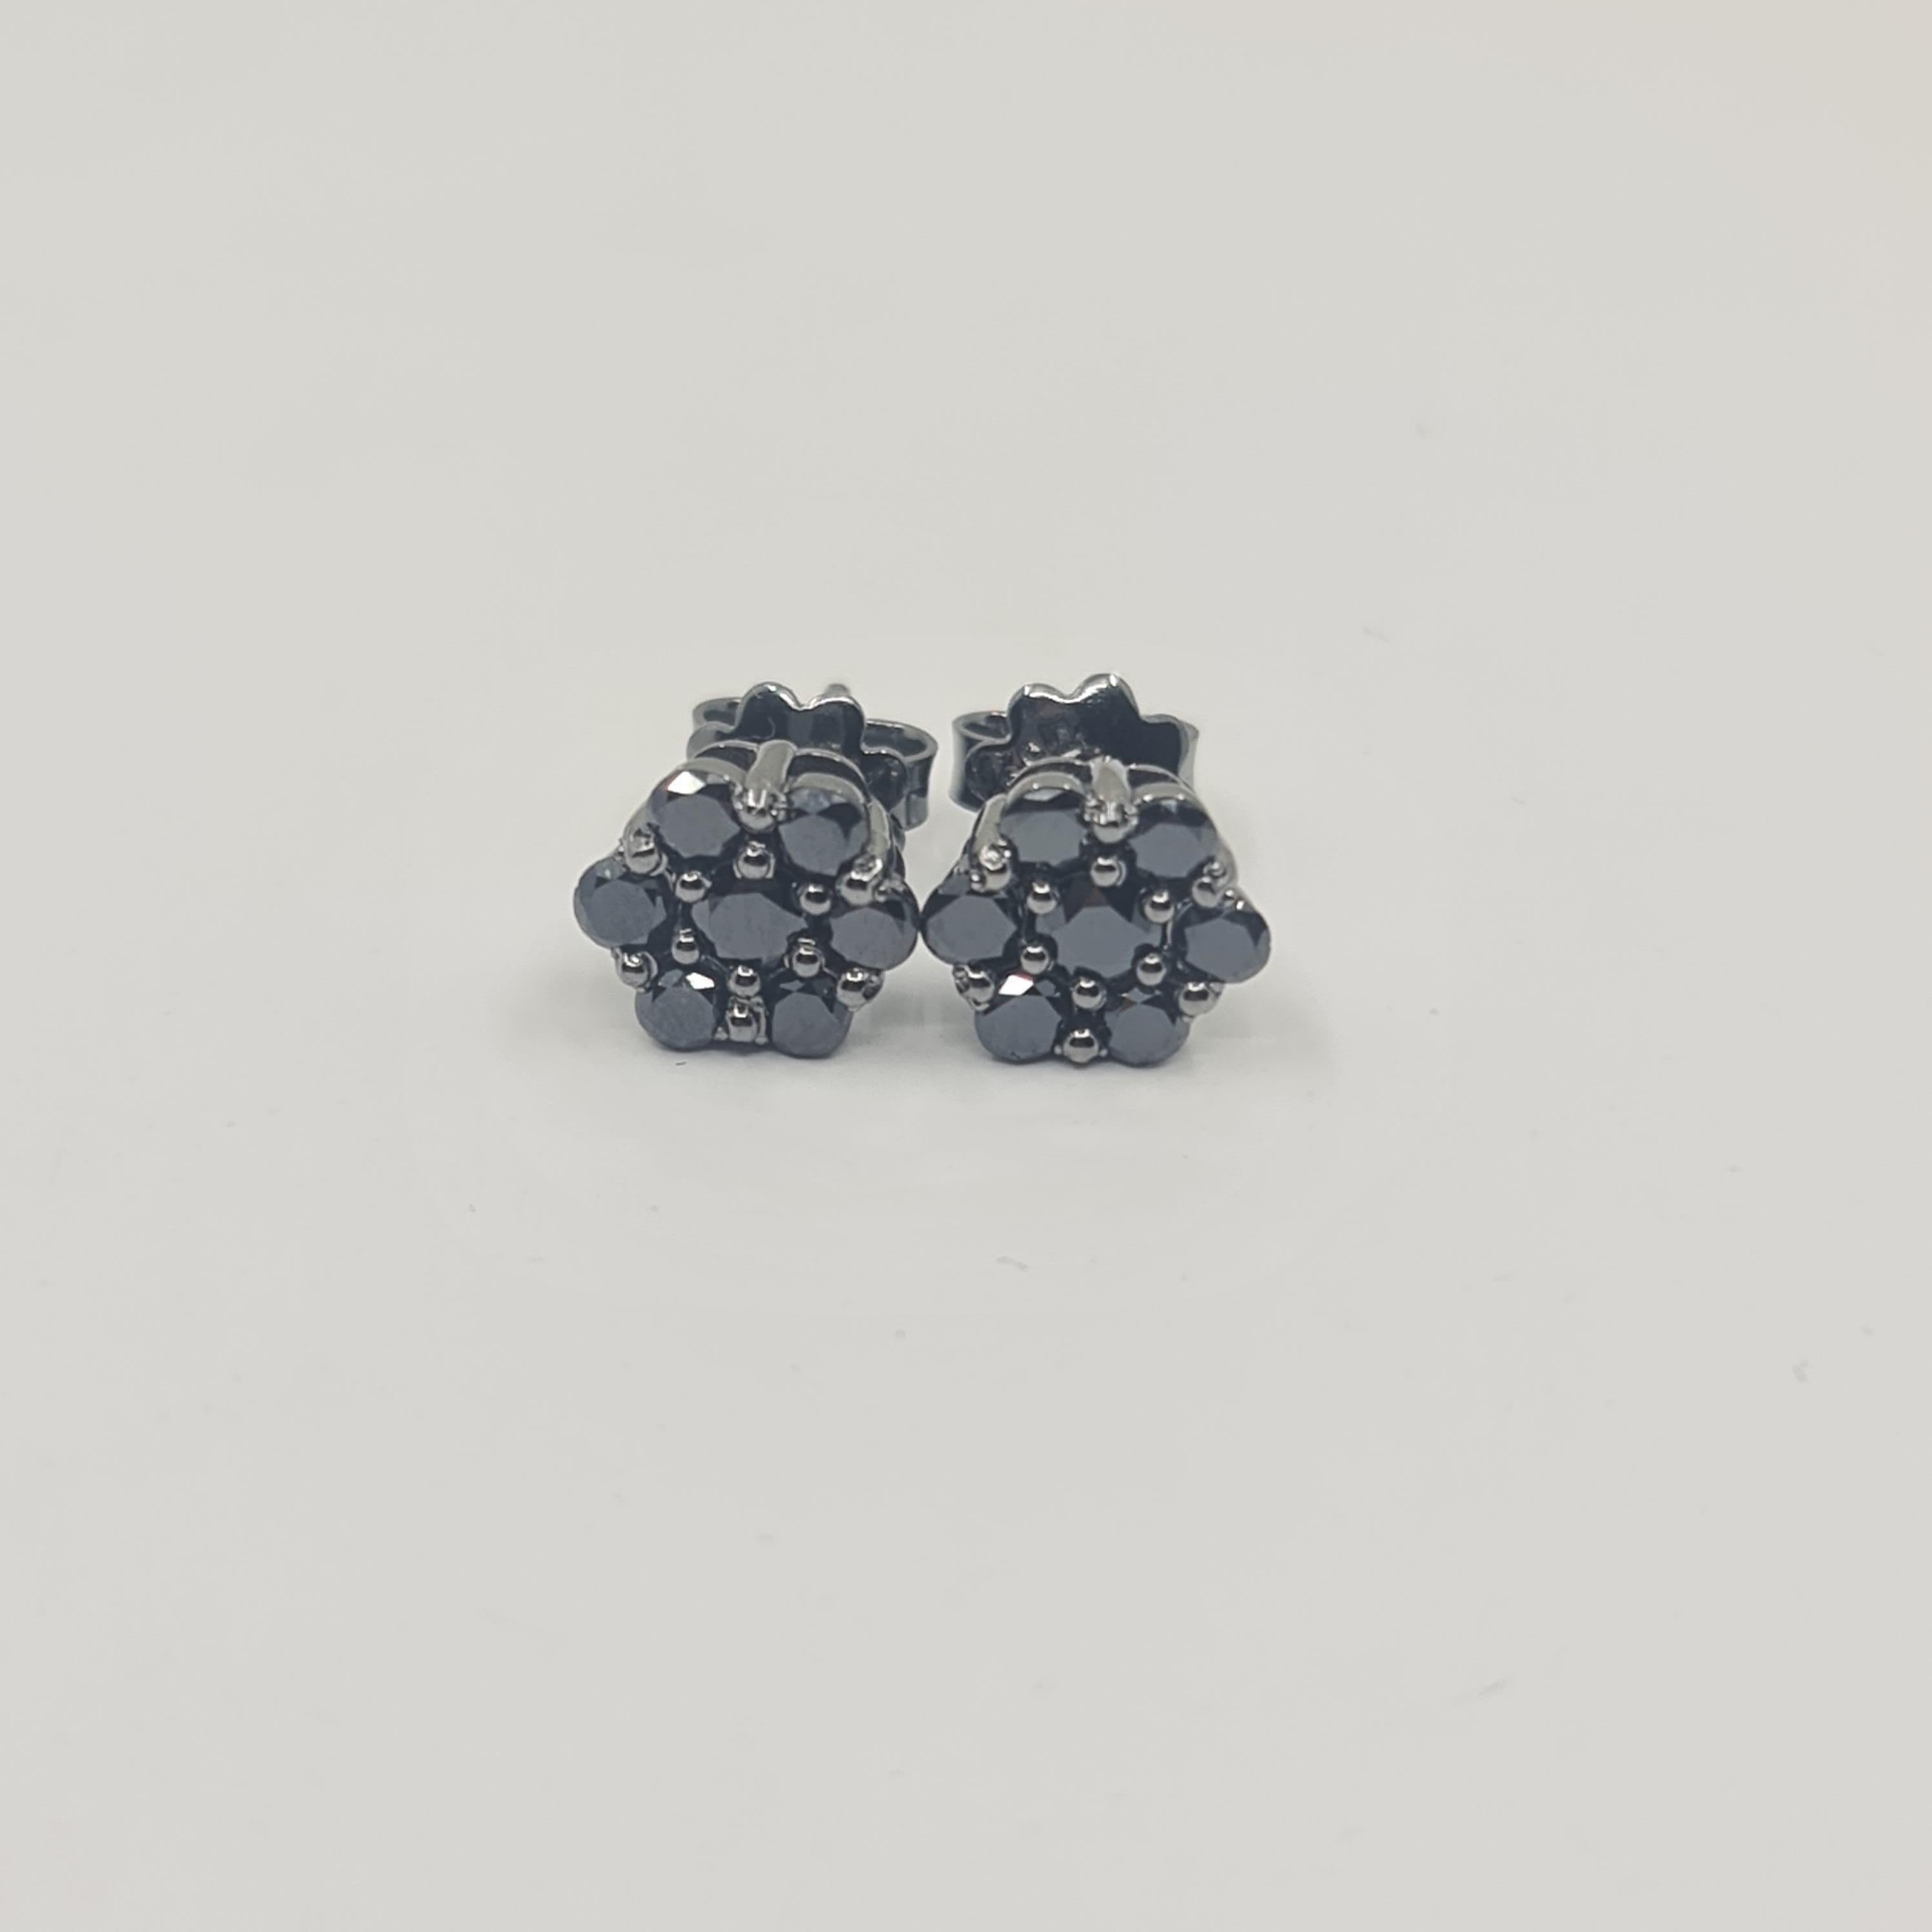 Exquisite Black Diamond Earrings 1.11 Carat in 18K Black Gold Round Cut

Black is Beautiful. Black is Powerful.
We are very excited to introduce our brand new BLACK STARS collection worldwide! 
All Black Diamonds set in Black Coated 18K Gold. 
Pure